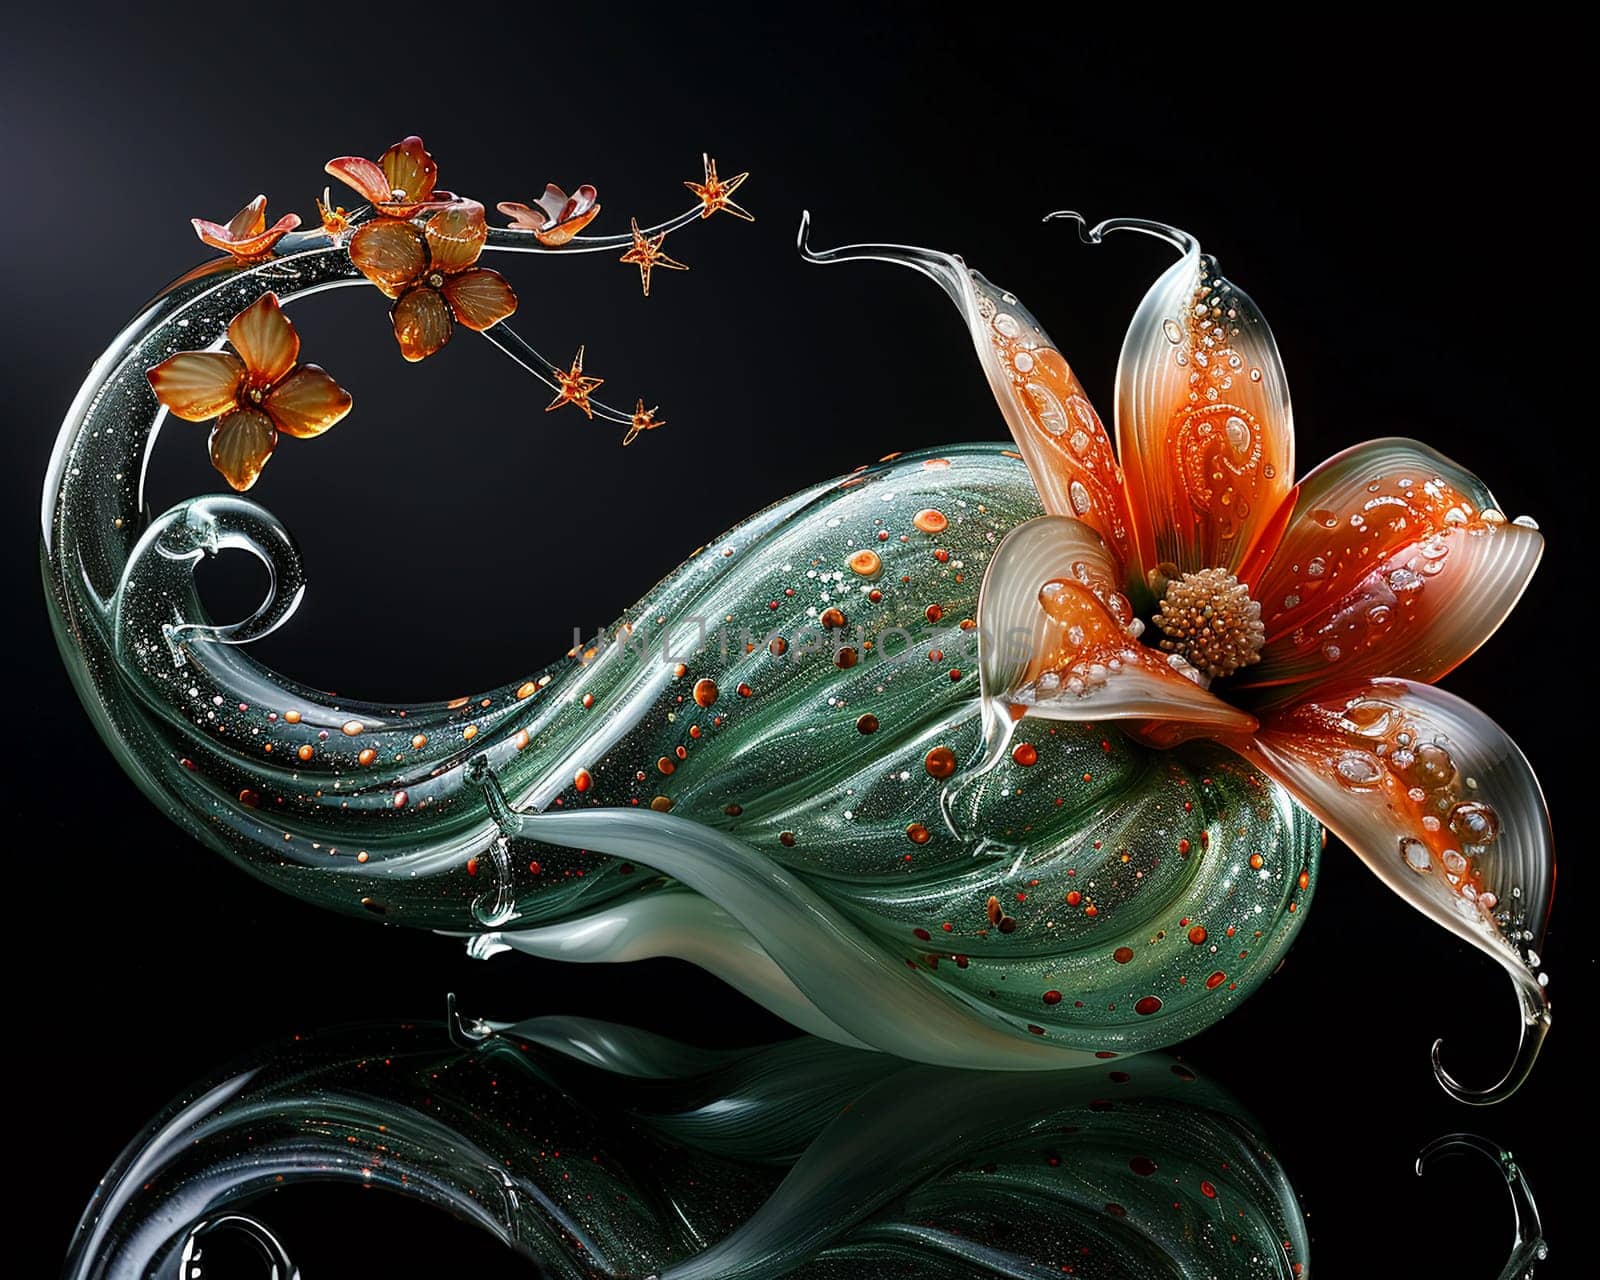 Artisan blowing glass, capturing the beauty and fragility of glass art